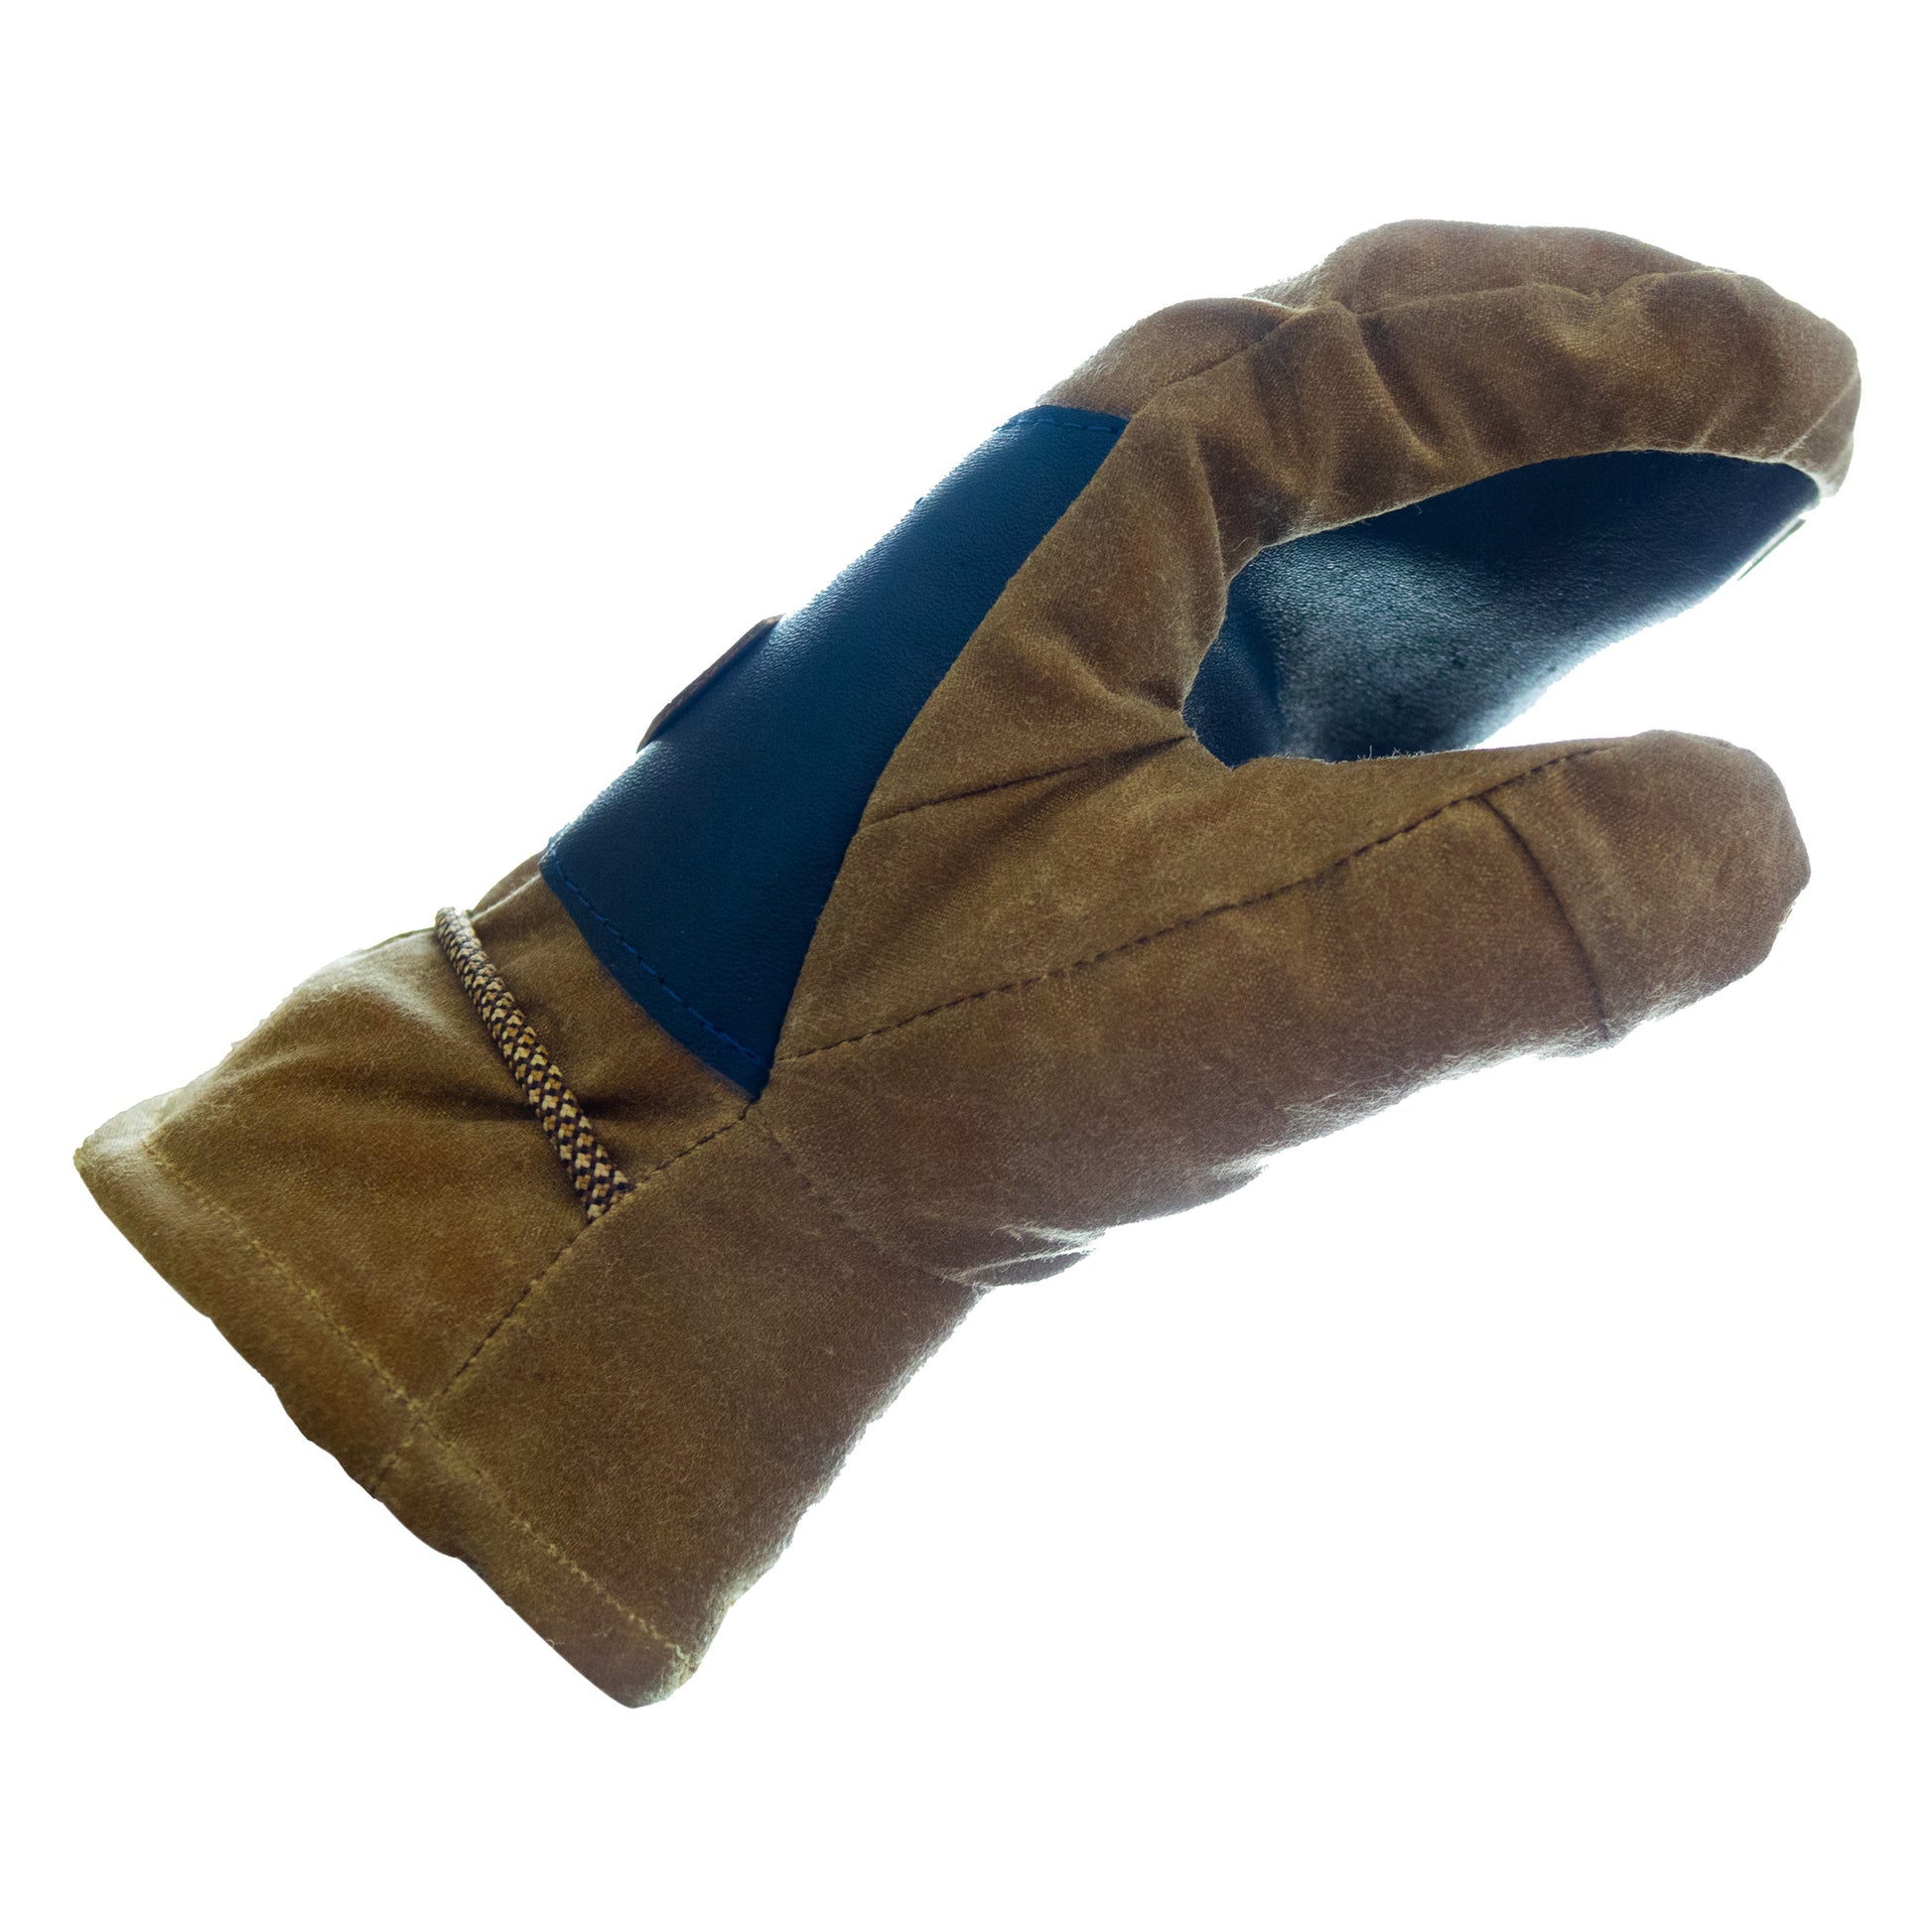 A pair of Peaks Mitts by Mainers with a blue lining.